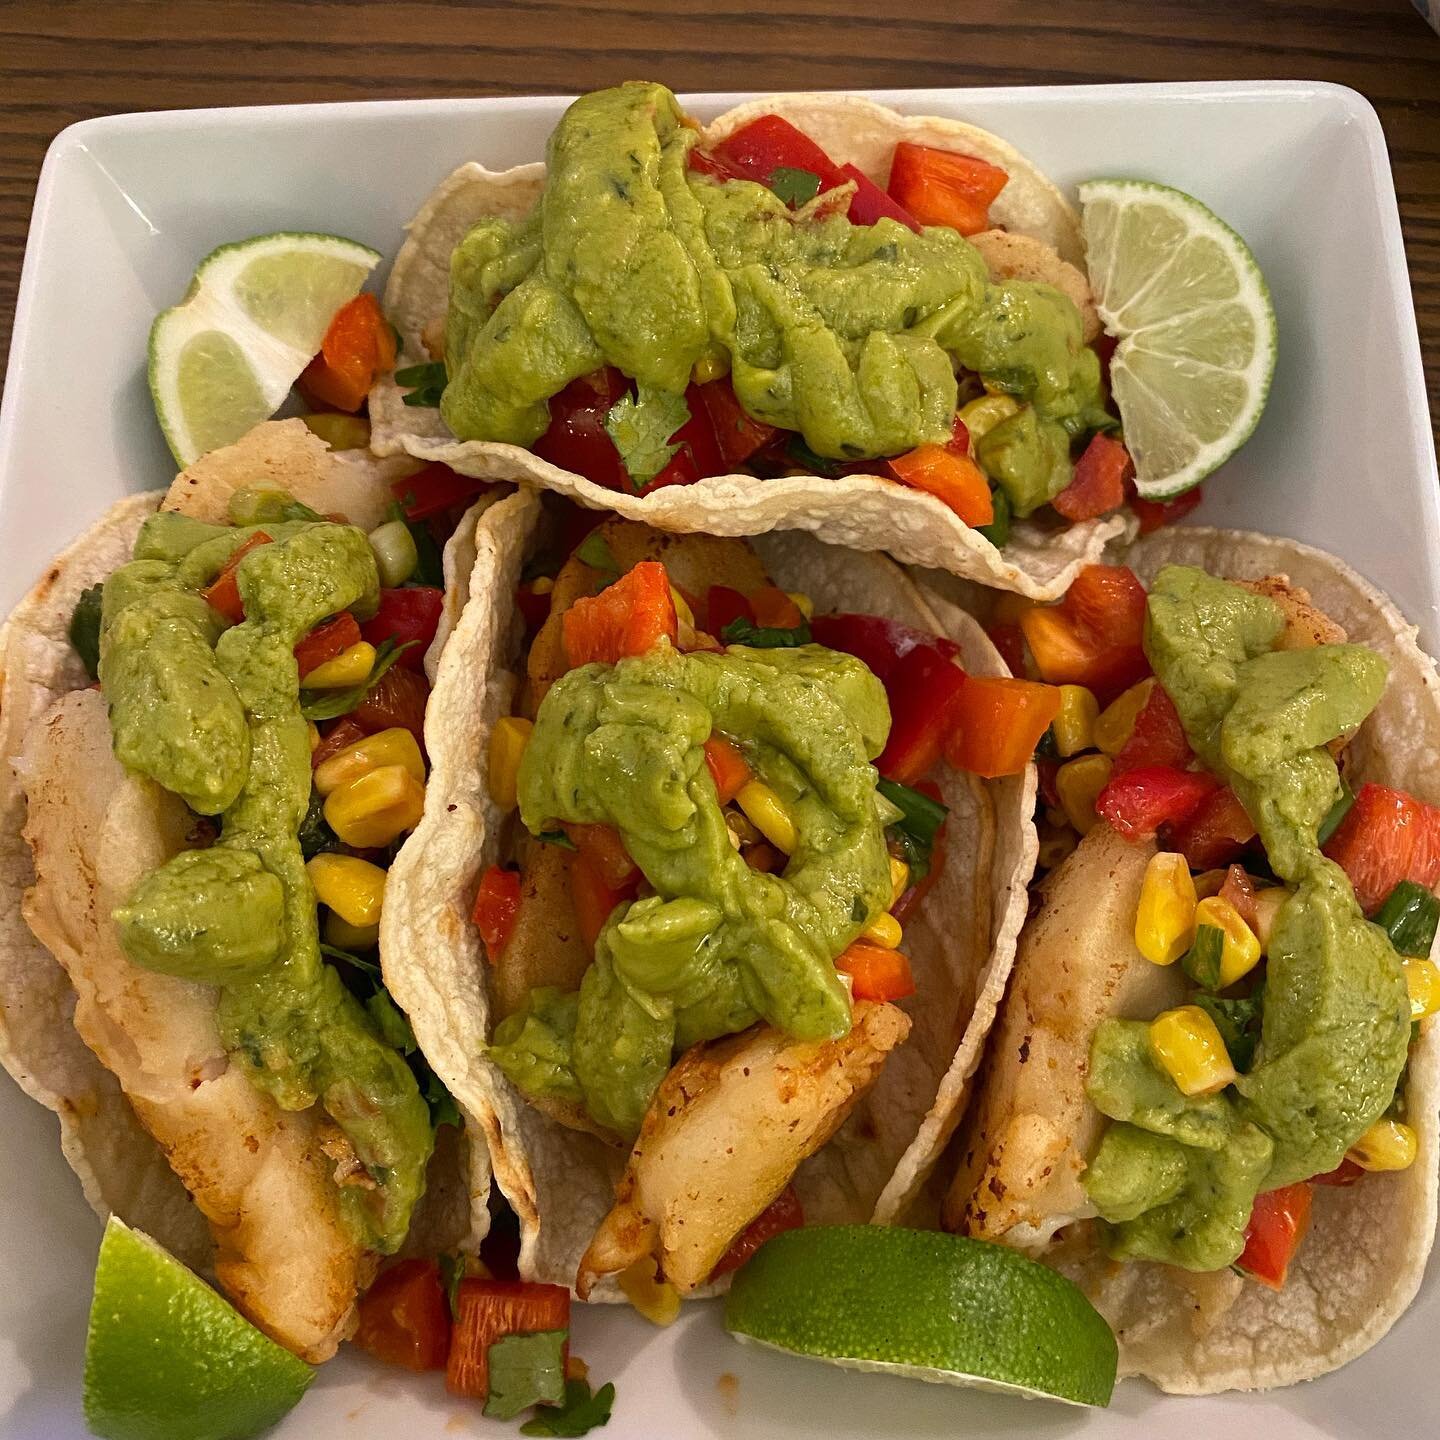 Fried Chicken Tacos with roasted corn salsa from @marleyspoon prepared by @chelseaconnor